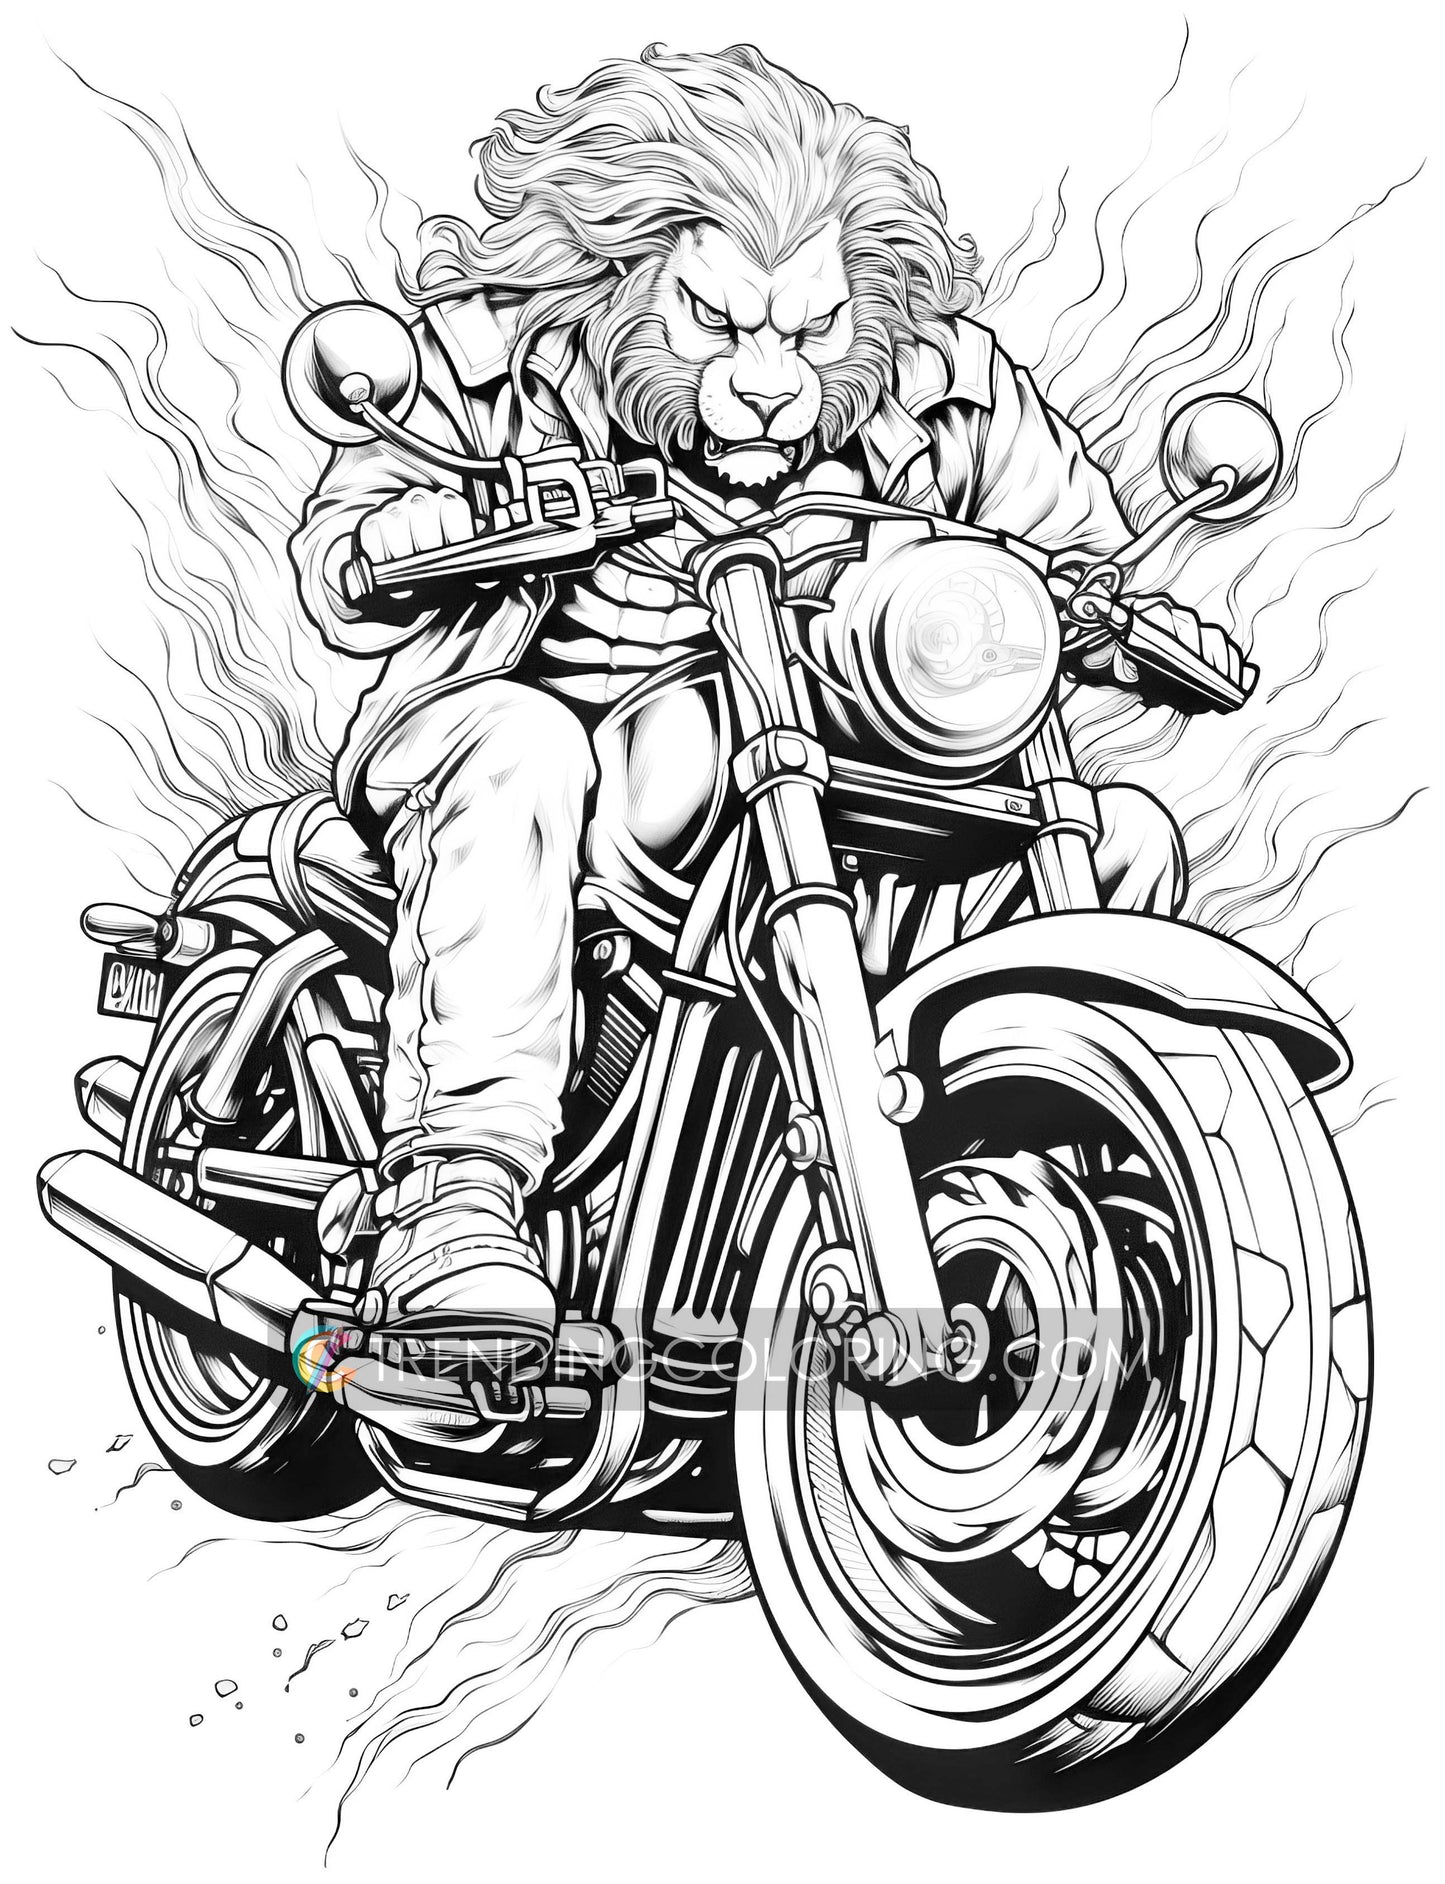 25 Animal Bikers Grayscale Coloring Pages - Instant Download - Printable